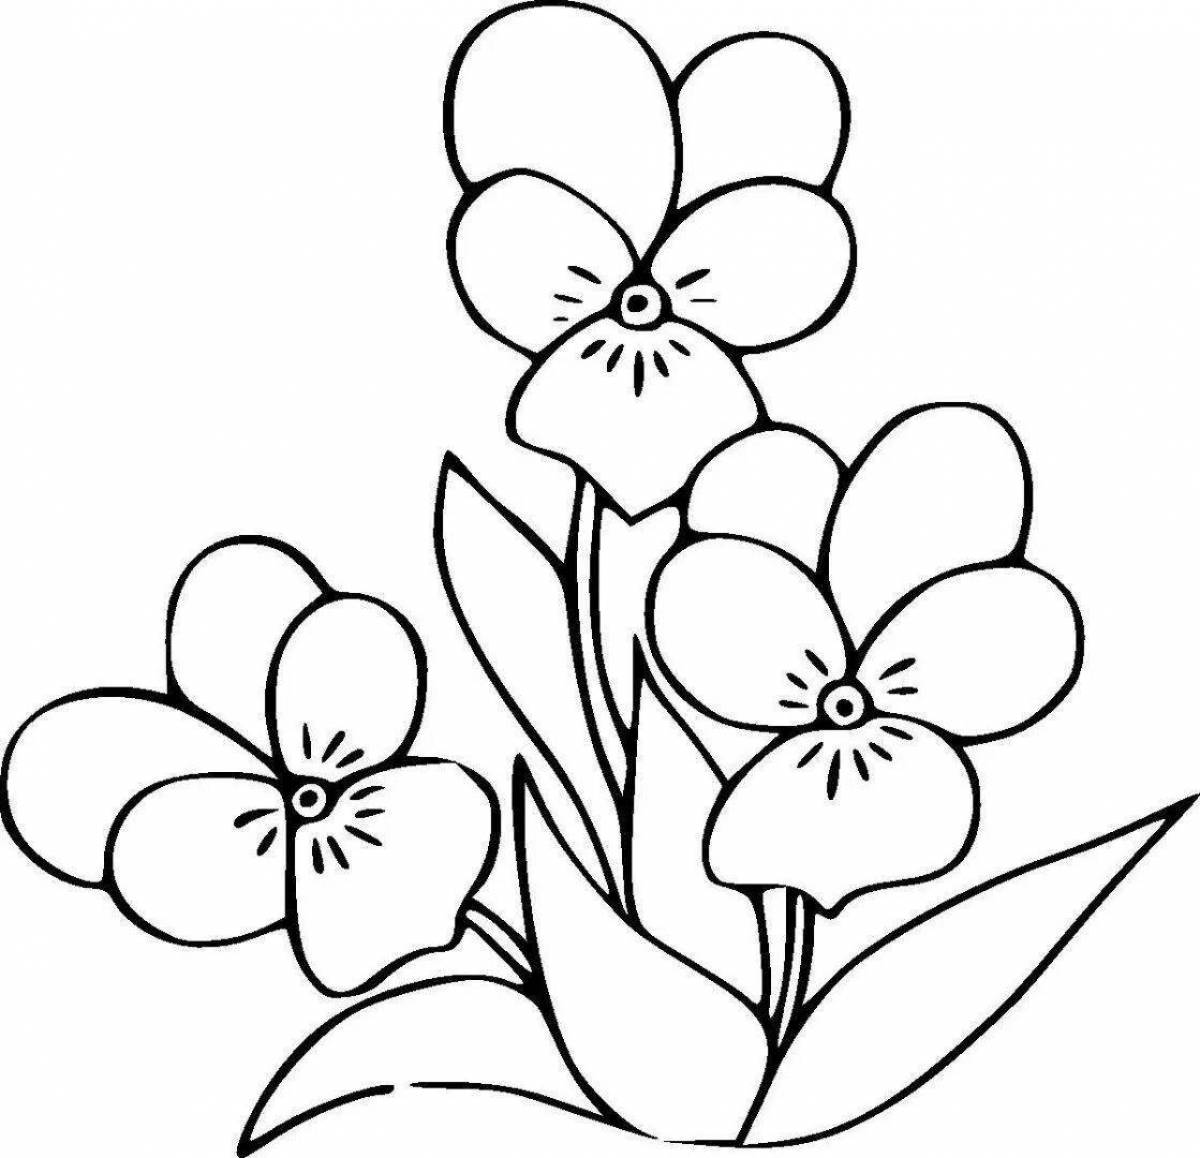 Sparkling purple flower coloring page